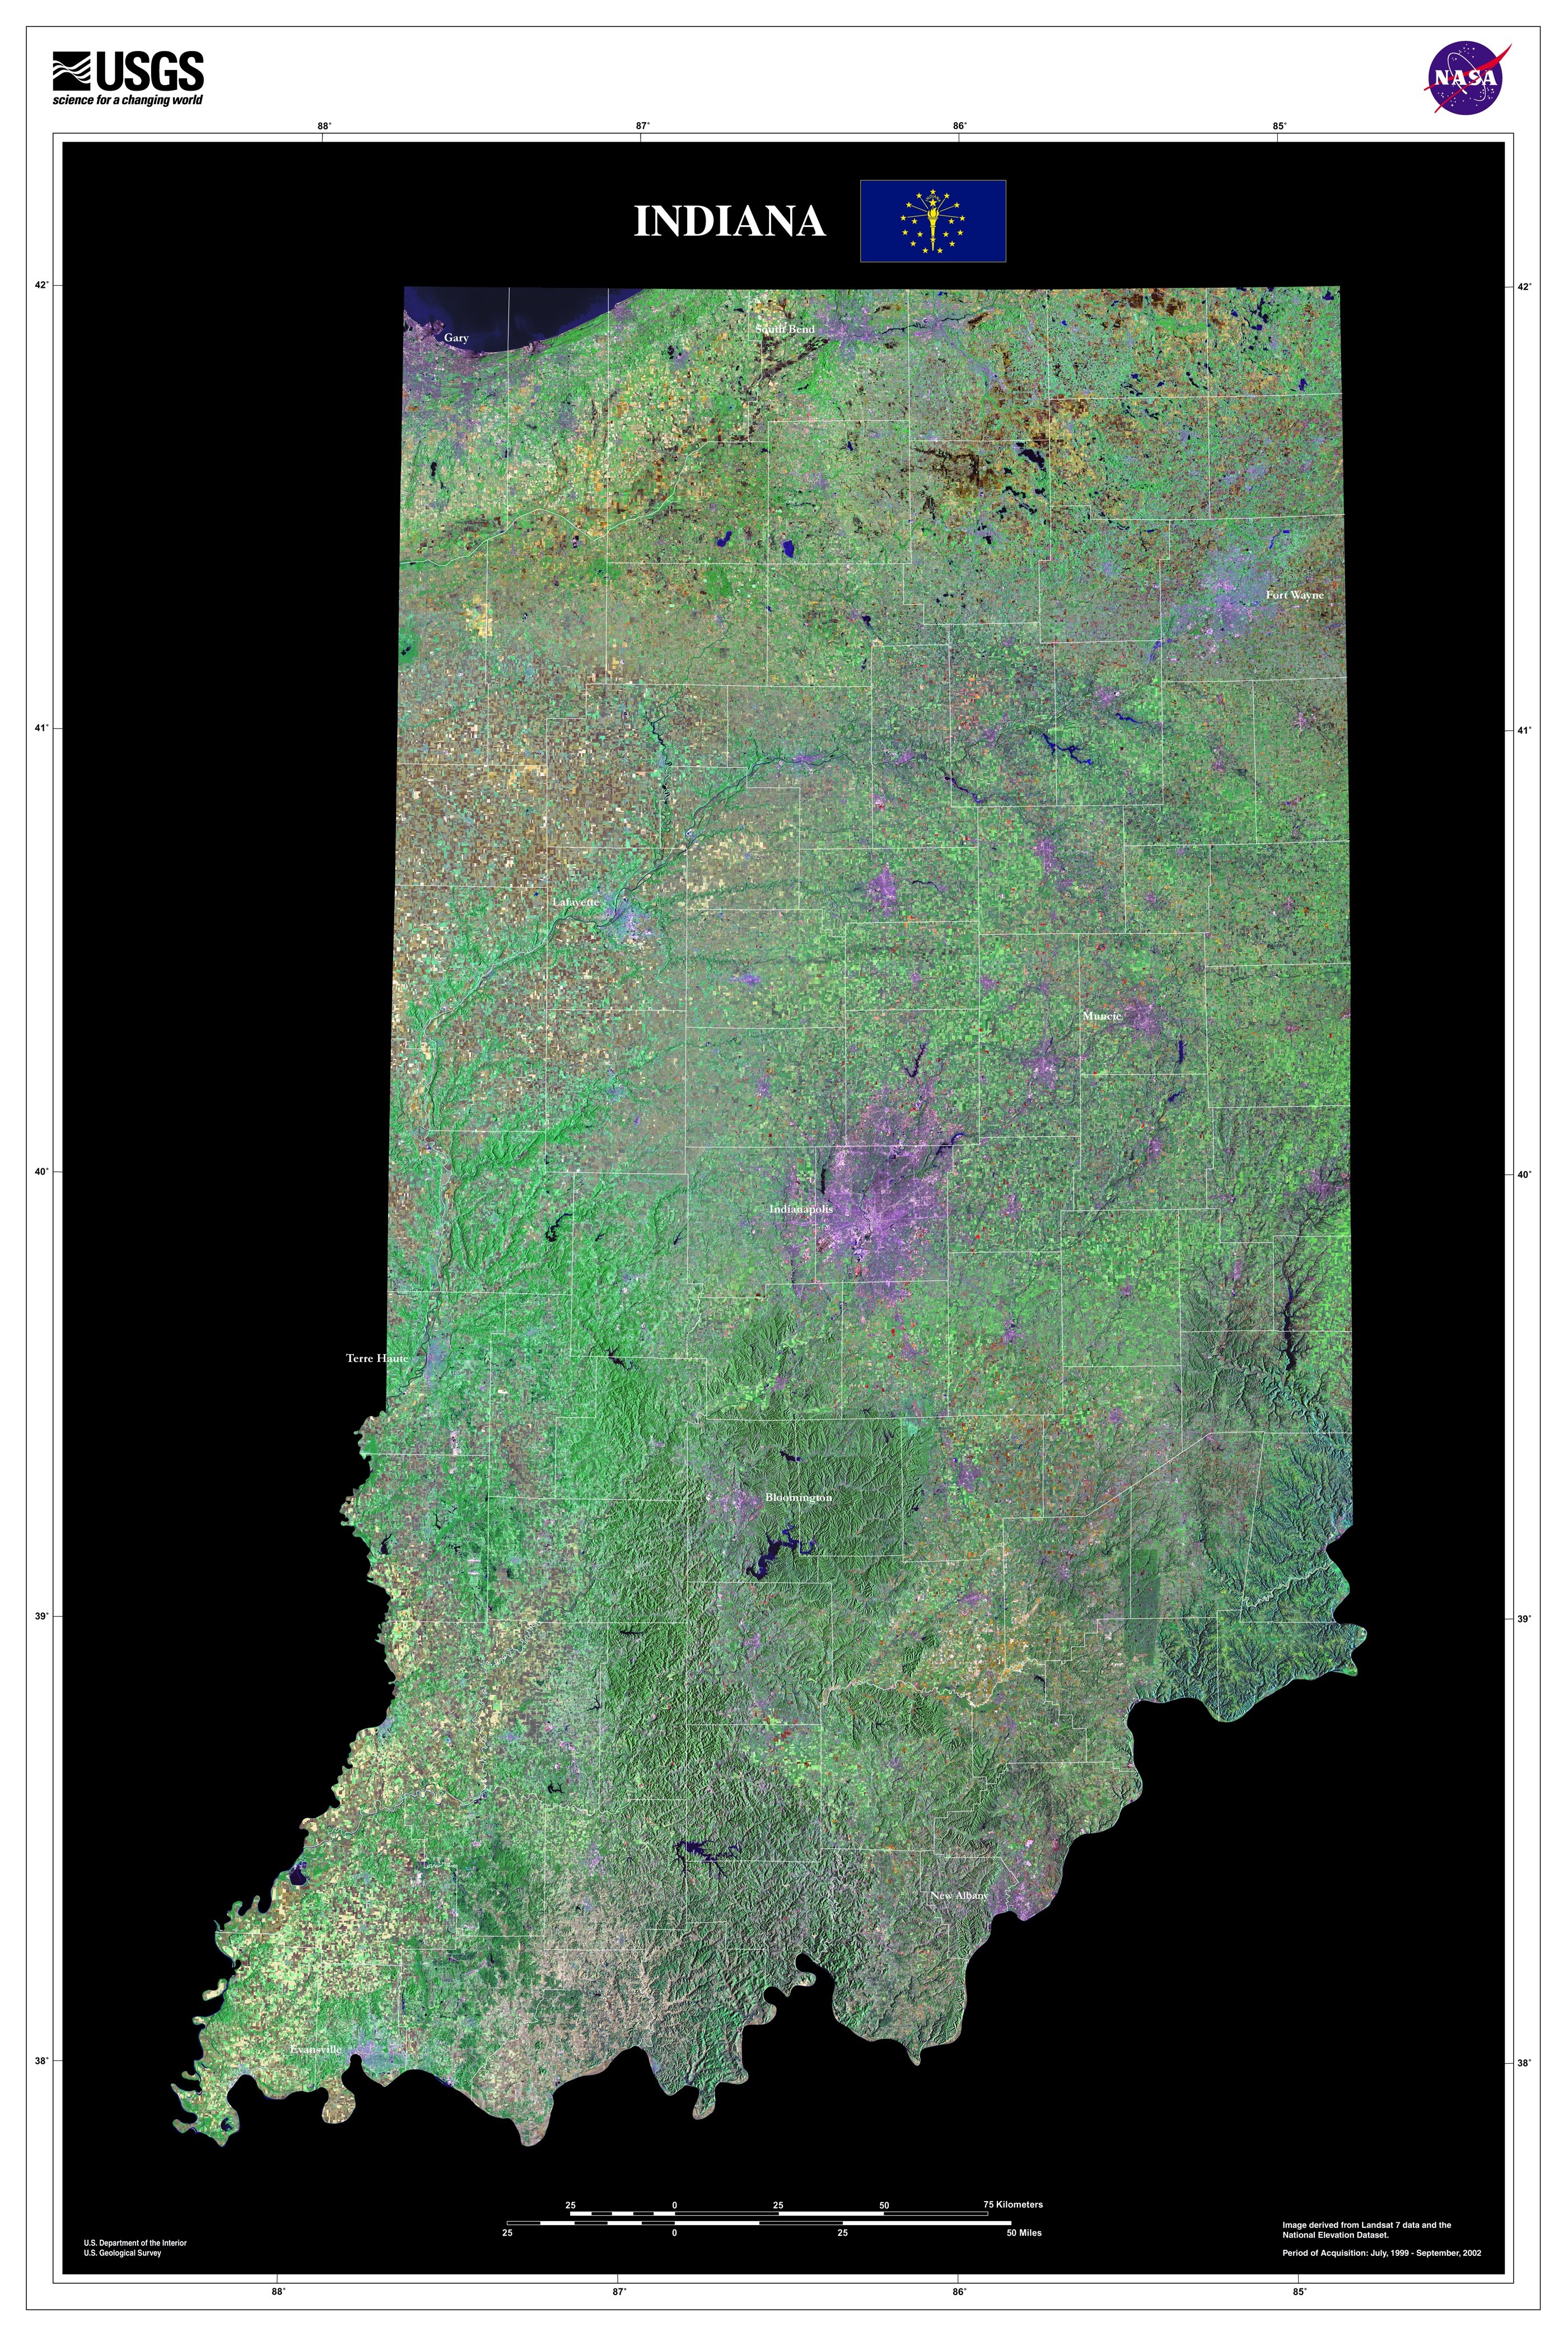  Satellite image of The State of Indiana, created from merging several Landsat images together. 